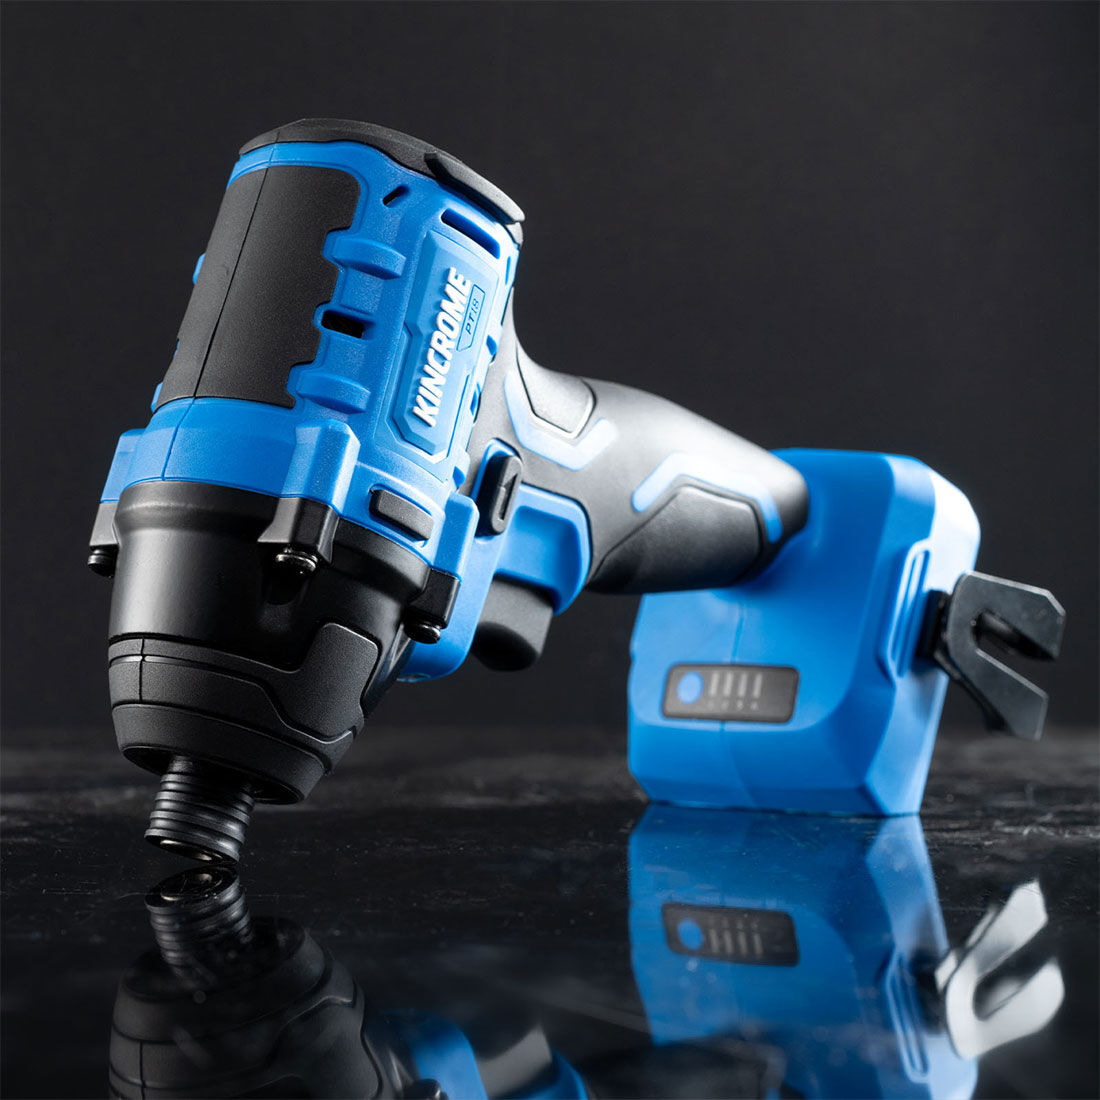 Kincrome PT18 18V 2 Piece Brushless Drill & Impact Driver Kit 2.0Ah, , scaau_hi-res